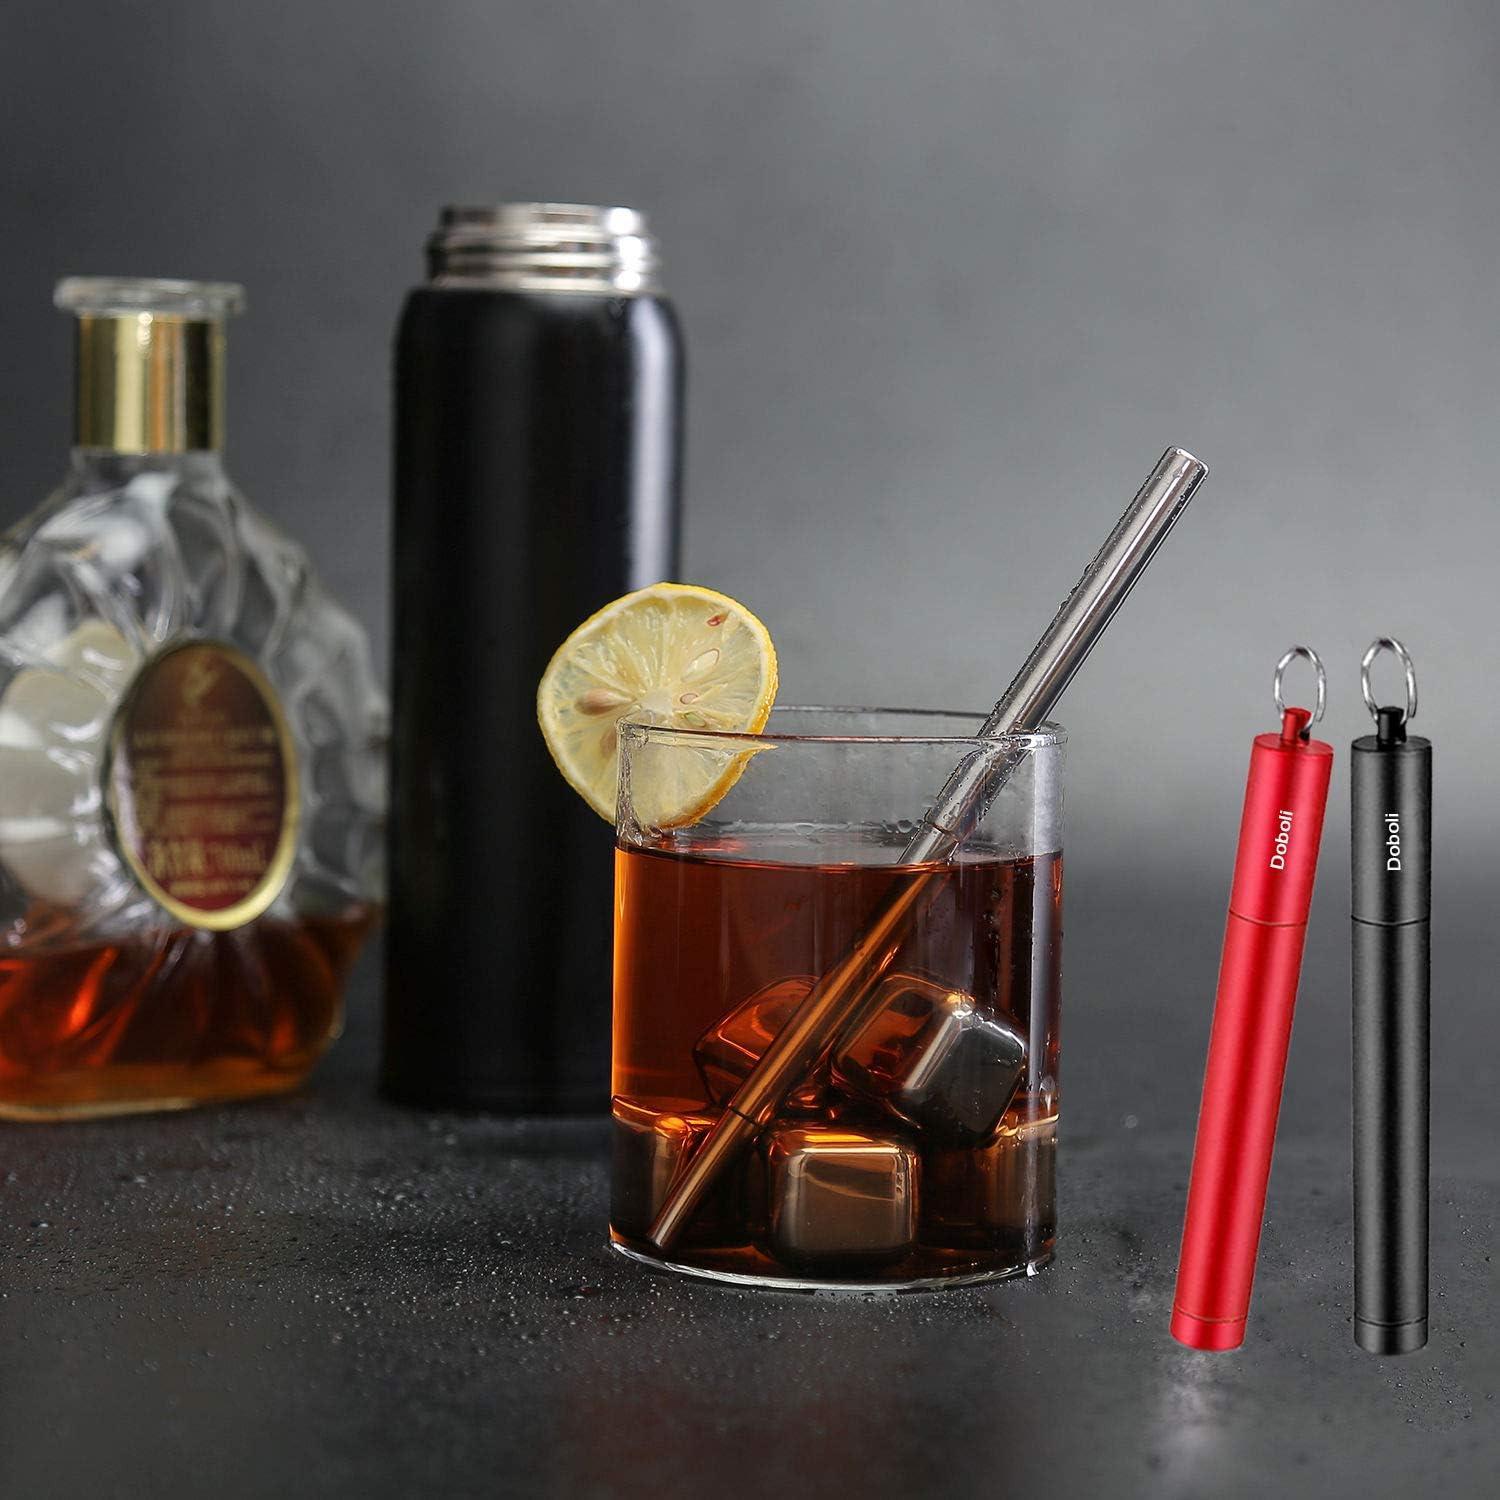 Portable Telescopic Stainless Steel Straw With Aluminum Case